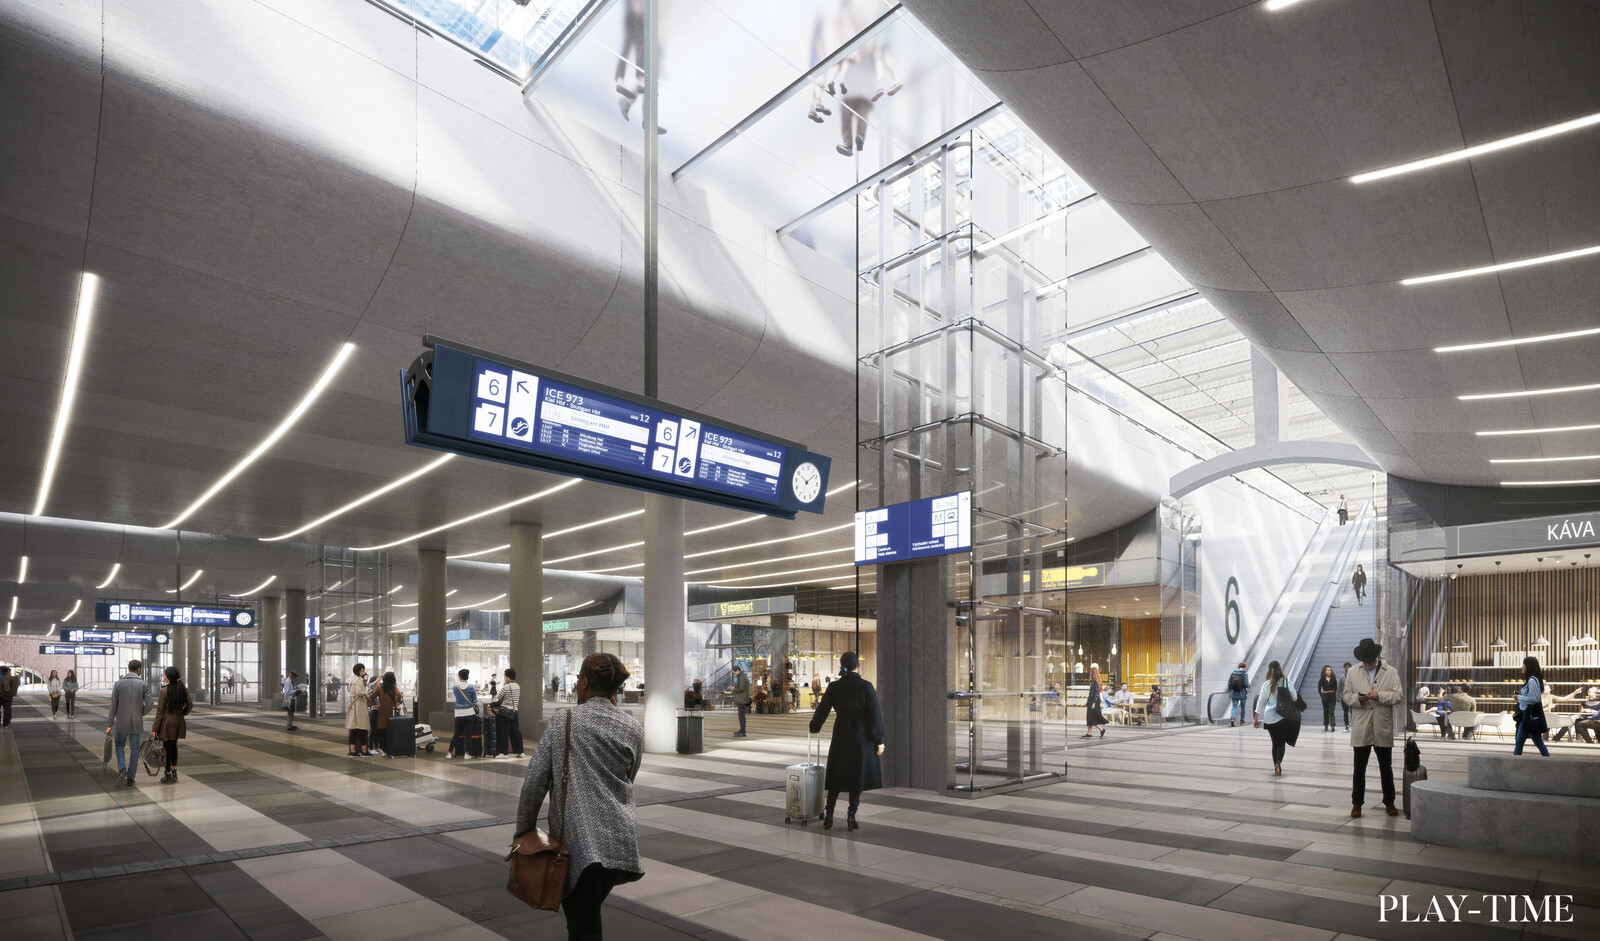 New Brno main Station by West8 design and Benthem Crouwel Architects. Image by Play-time